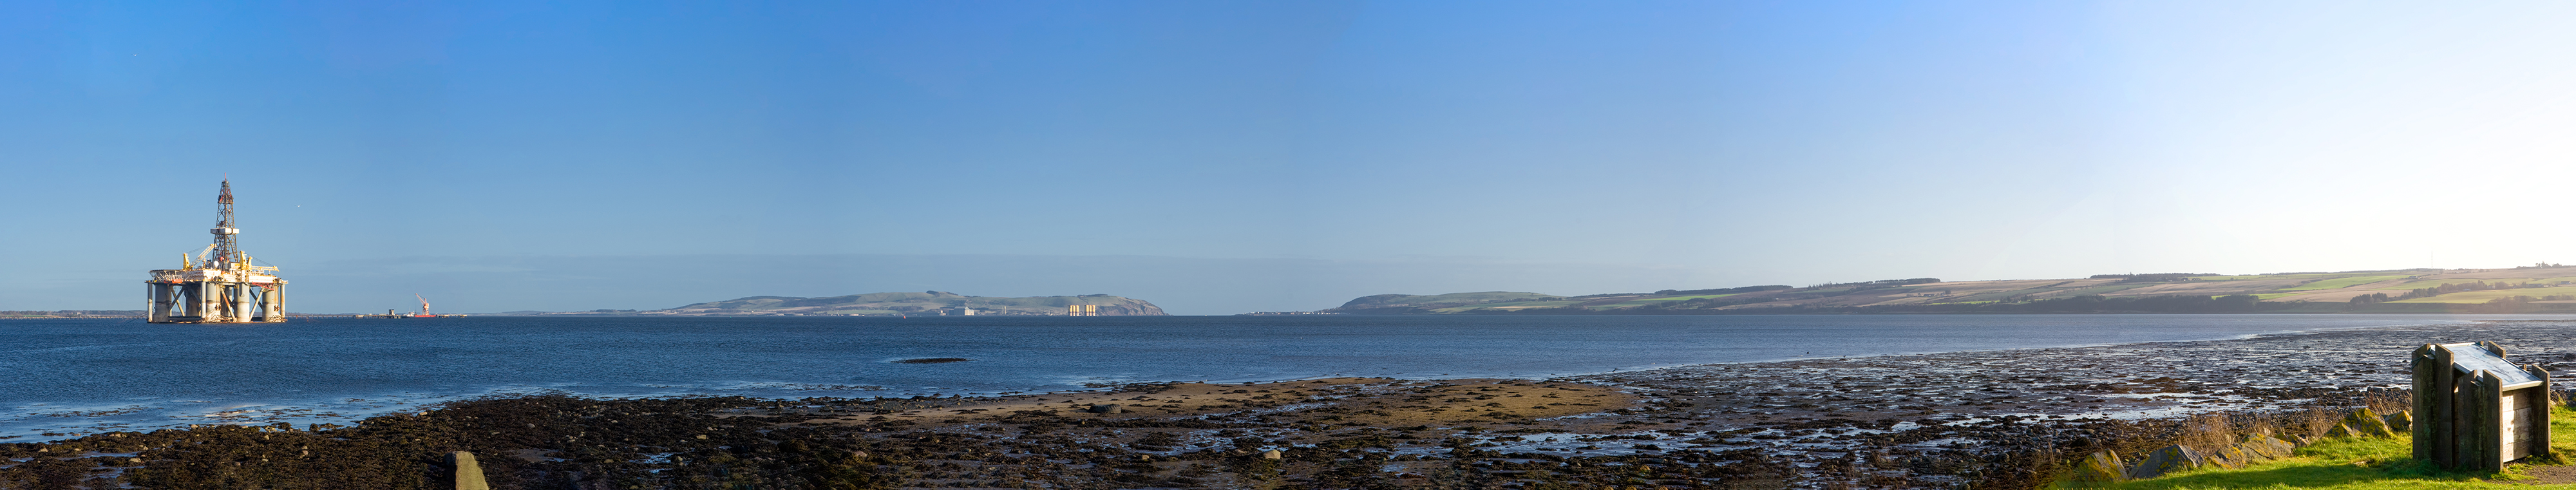 Looking towards Cromarty from Balblair Point